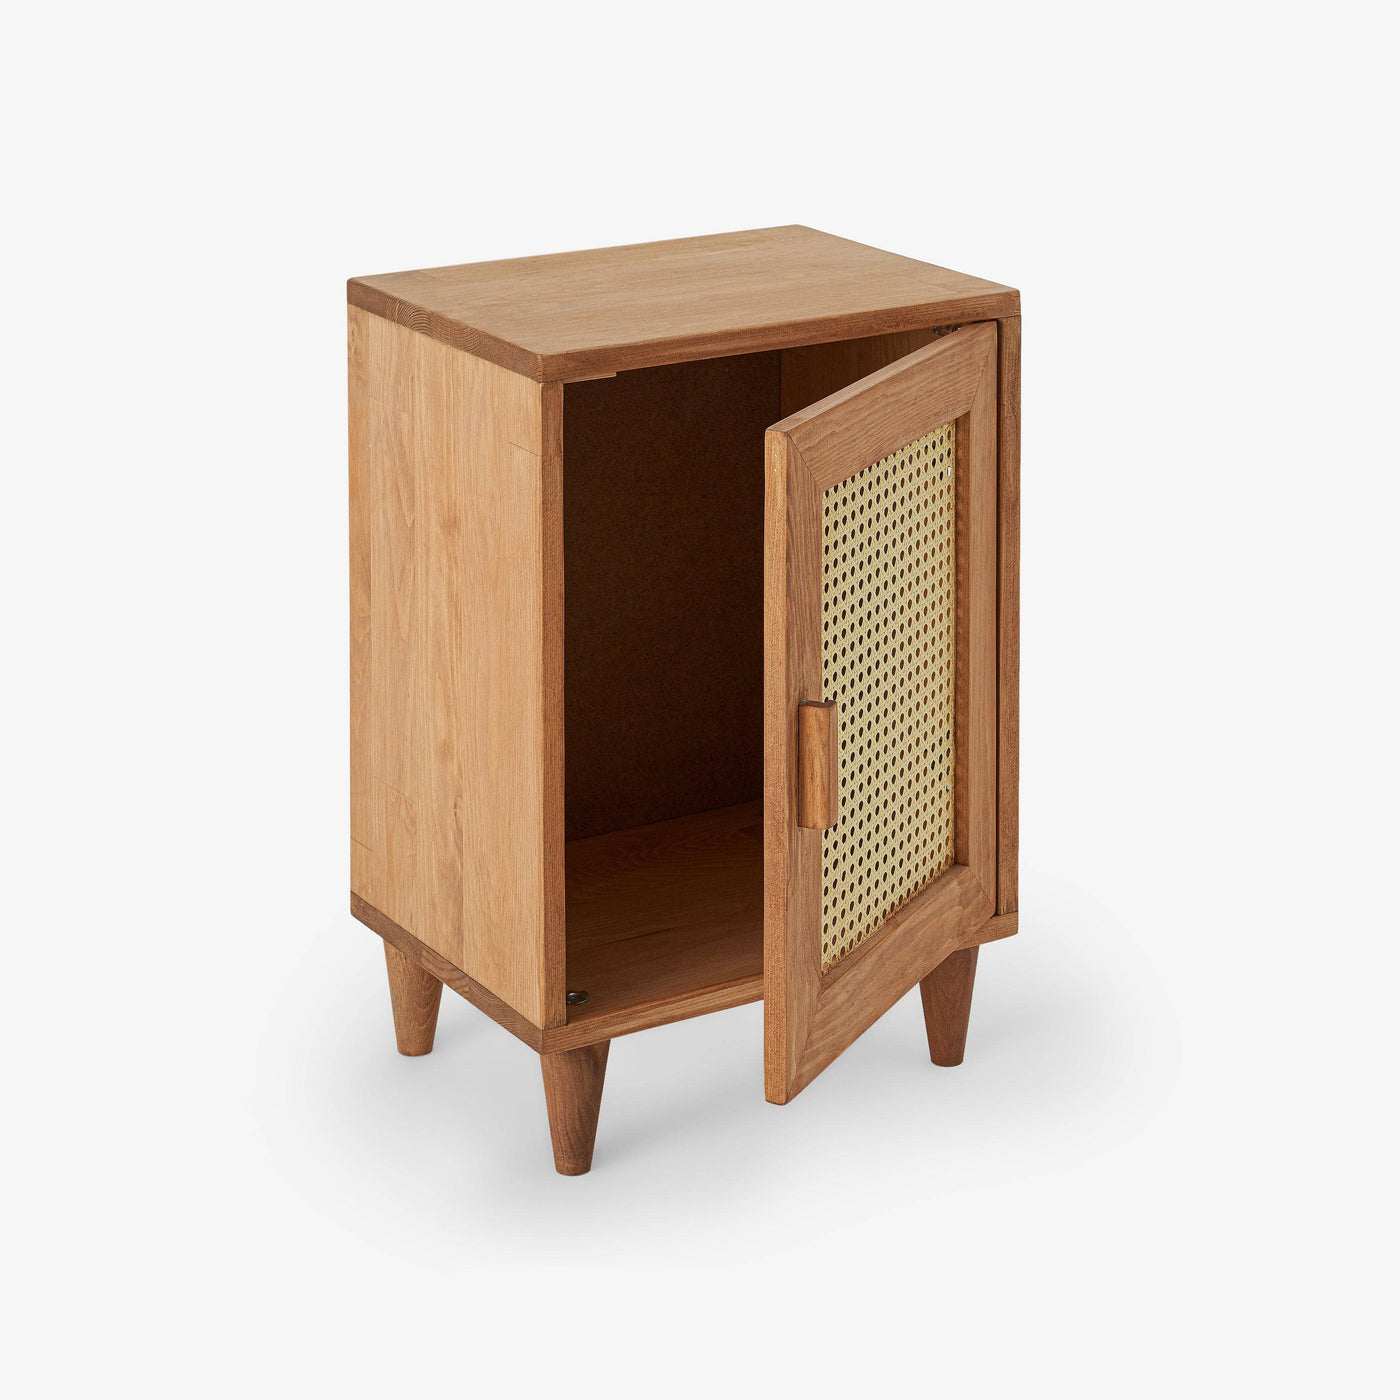 Rattan Bedside Table, 30x40x58 cm, Natural 5